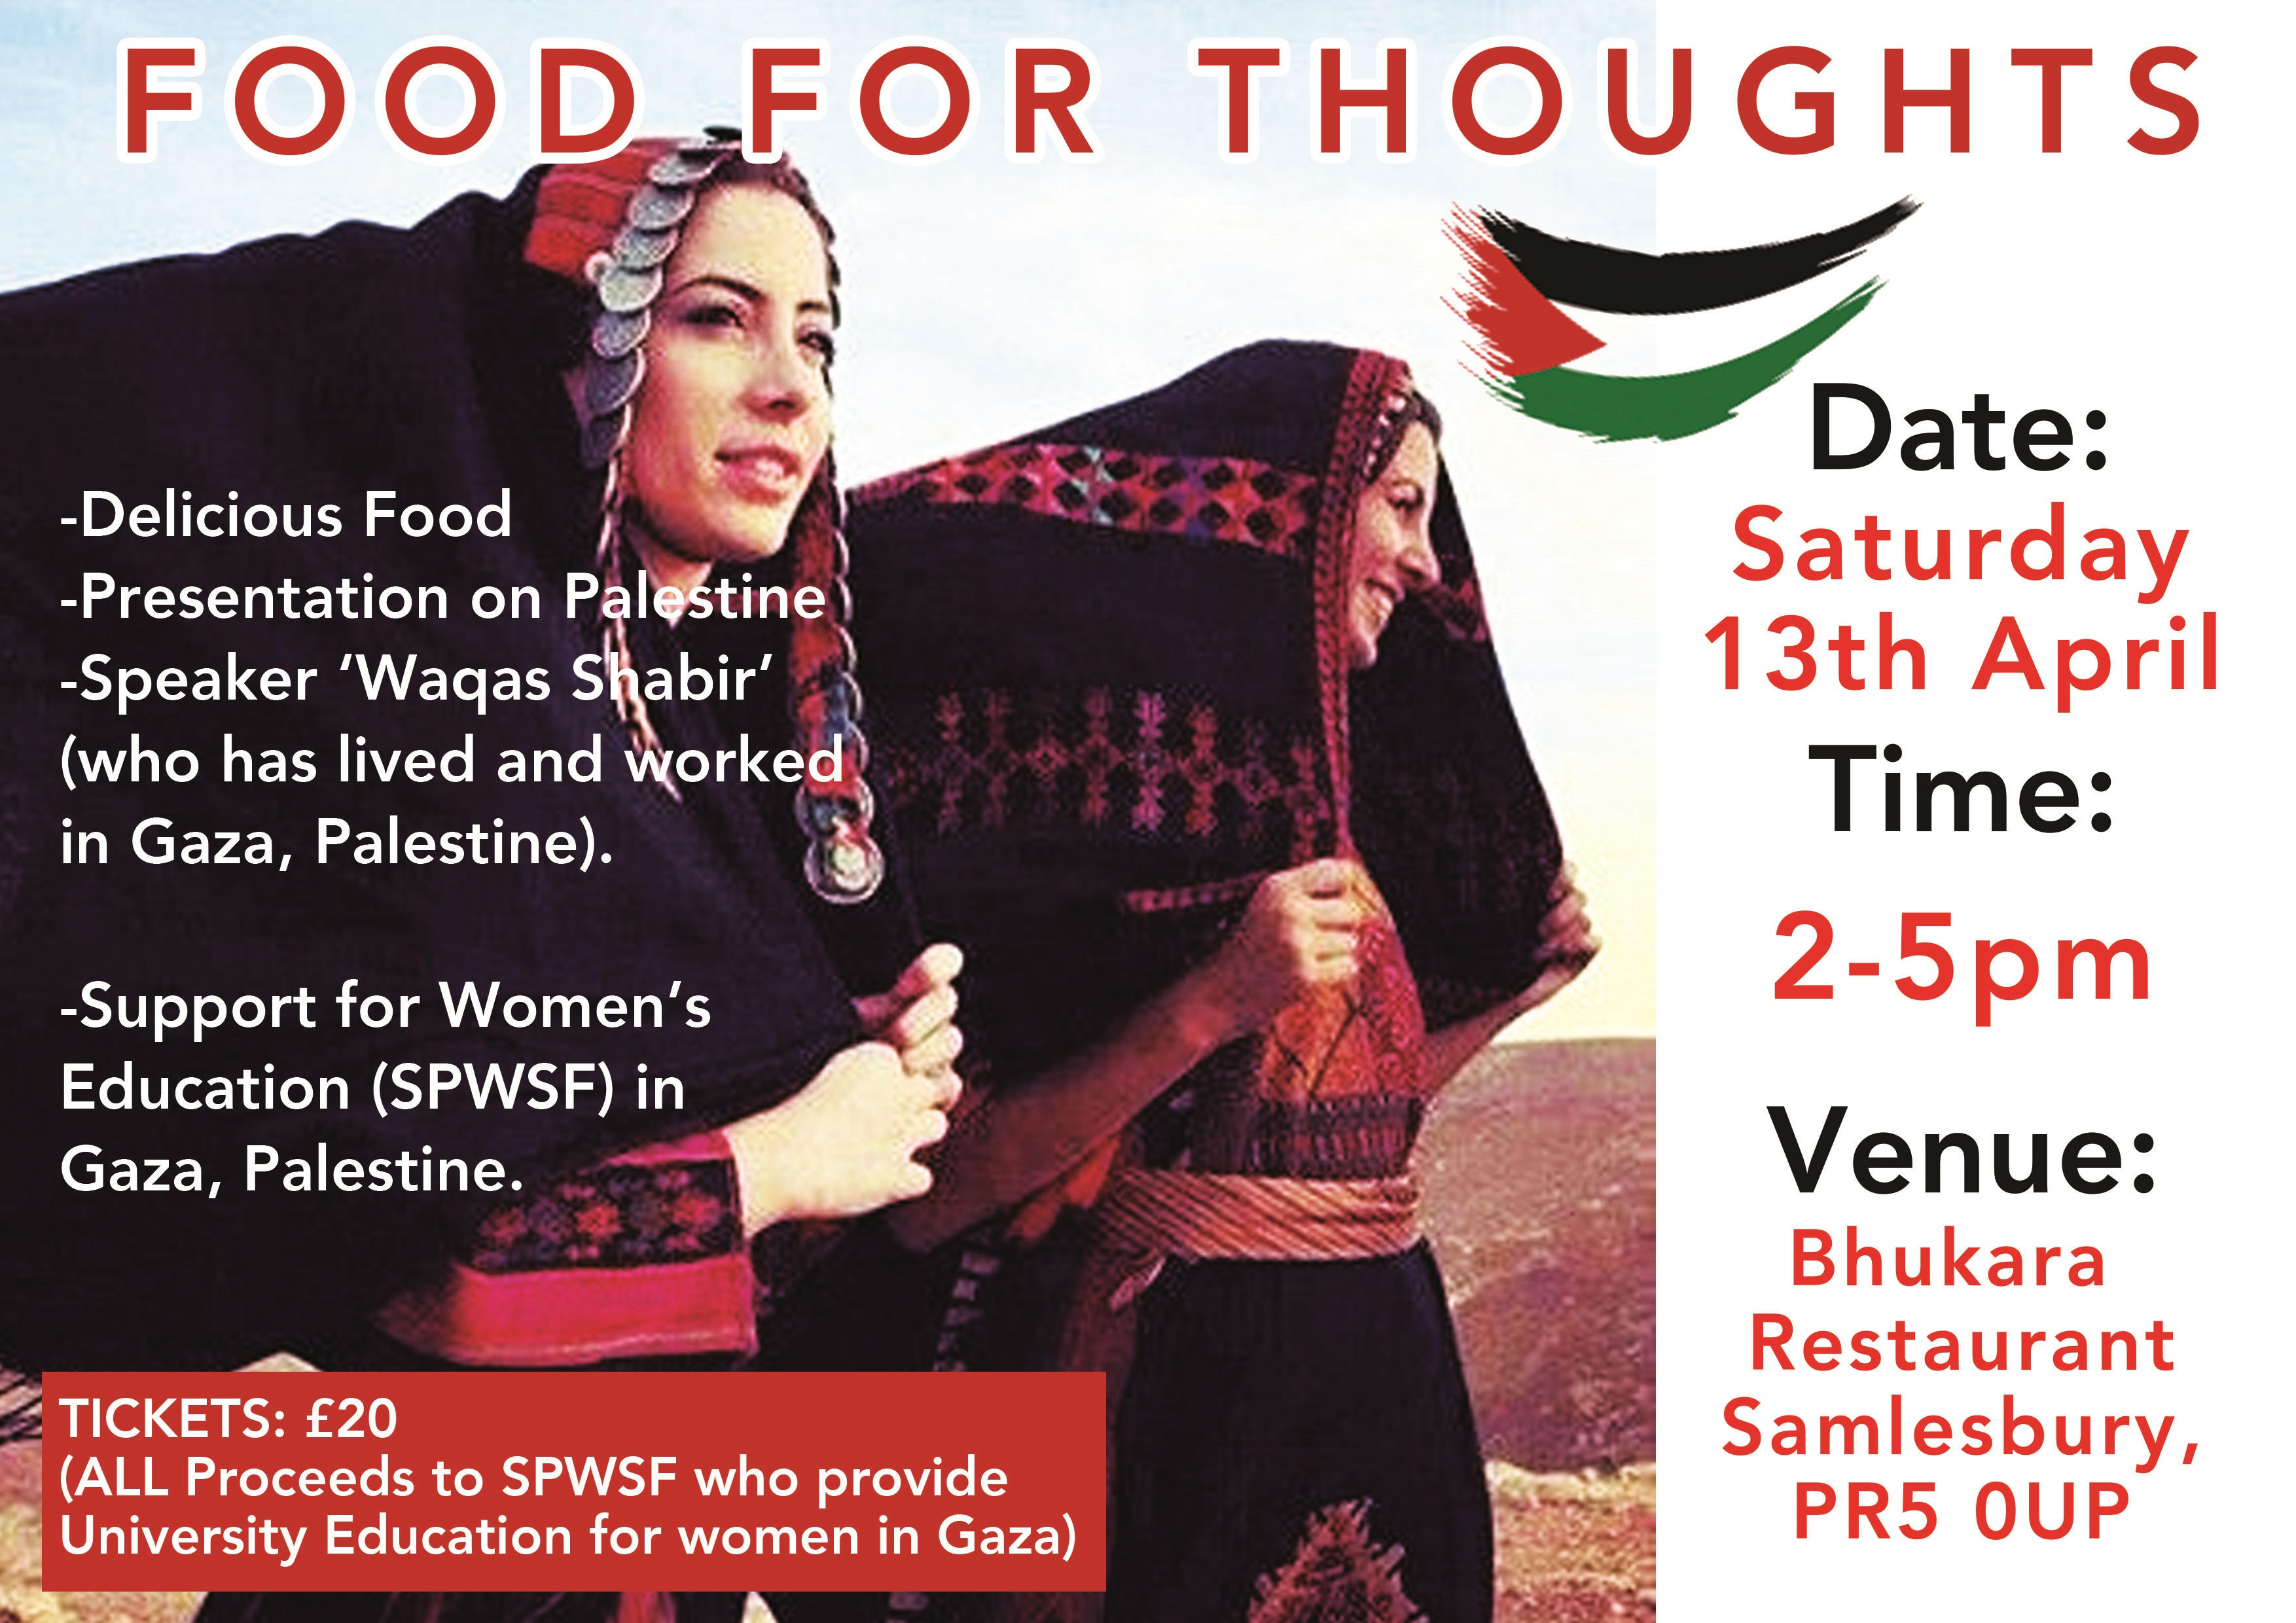 Food For Thought - Fund Raising Meal for the SPWSF